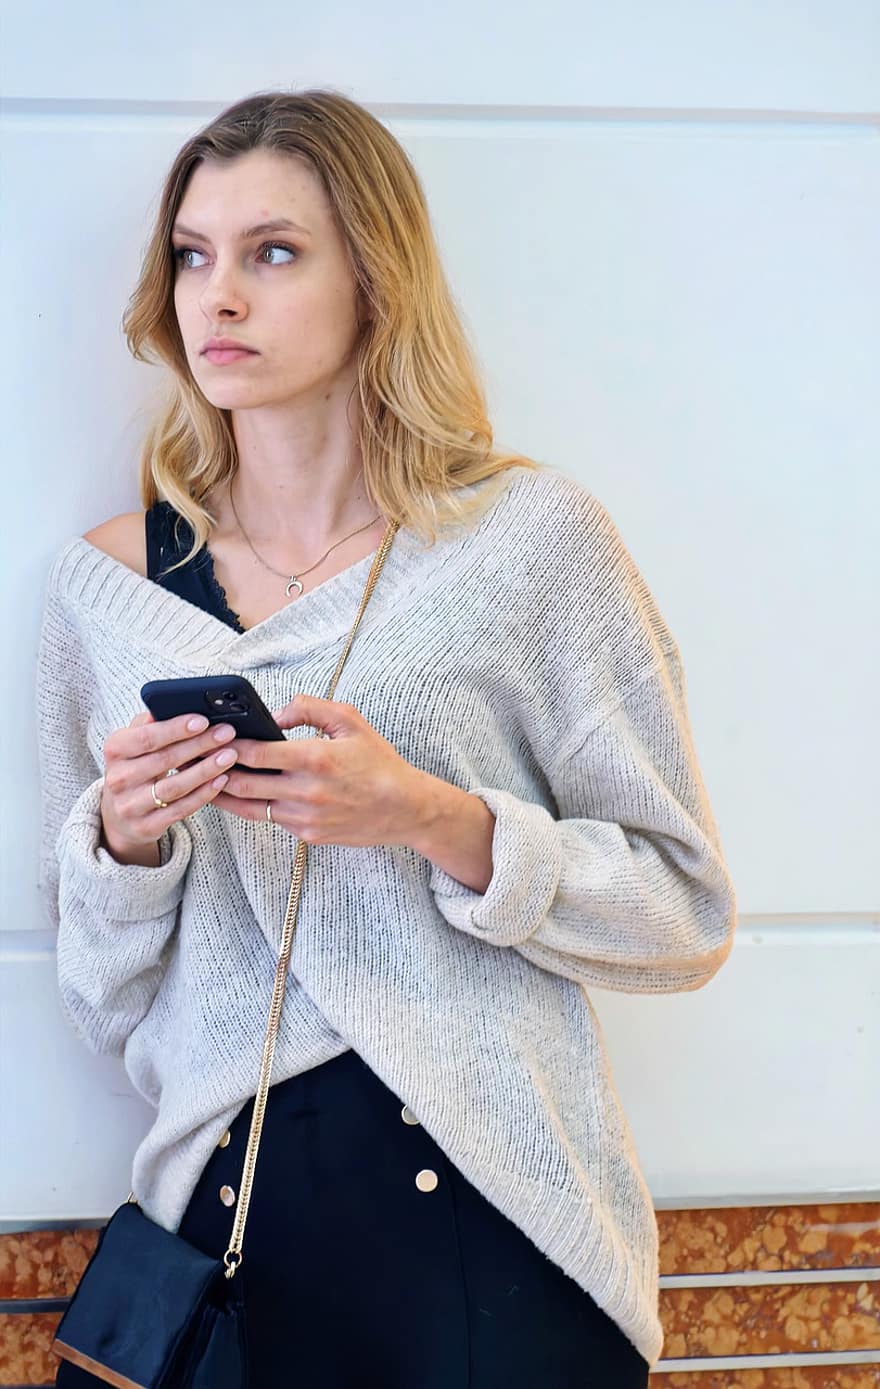 Woman, Leaning Against A Wall, Smartphone, Mall, Blonde, women, one person, adult, young adult, lifestyles, mobile phone